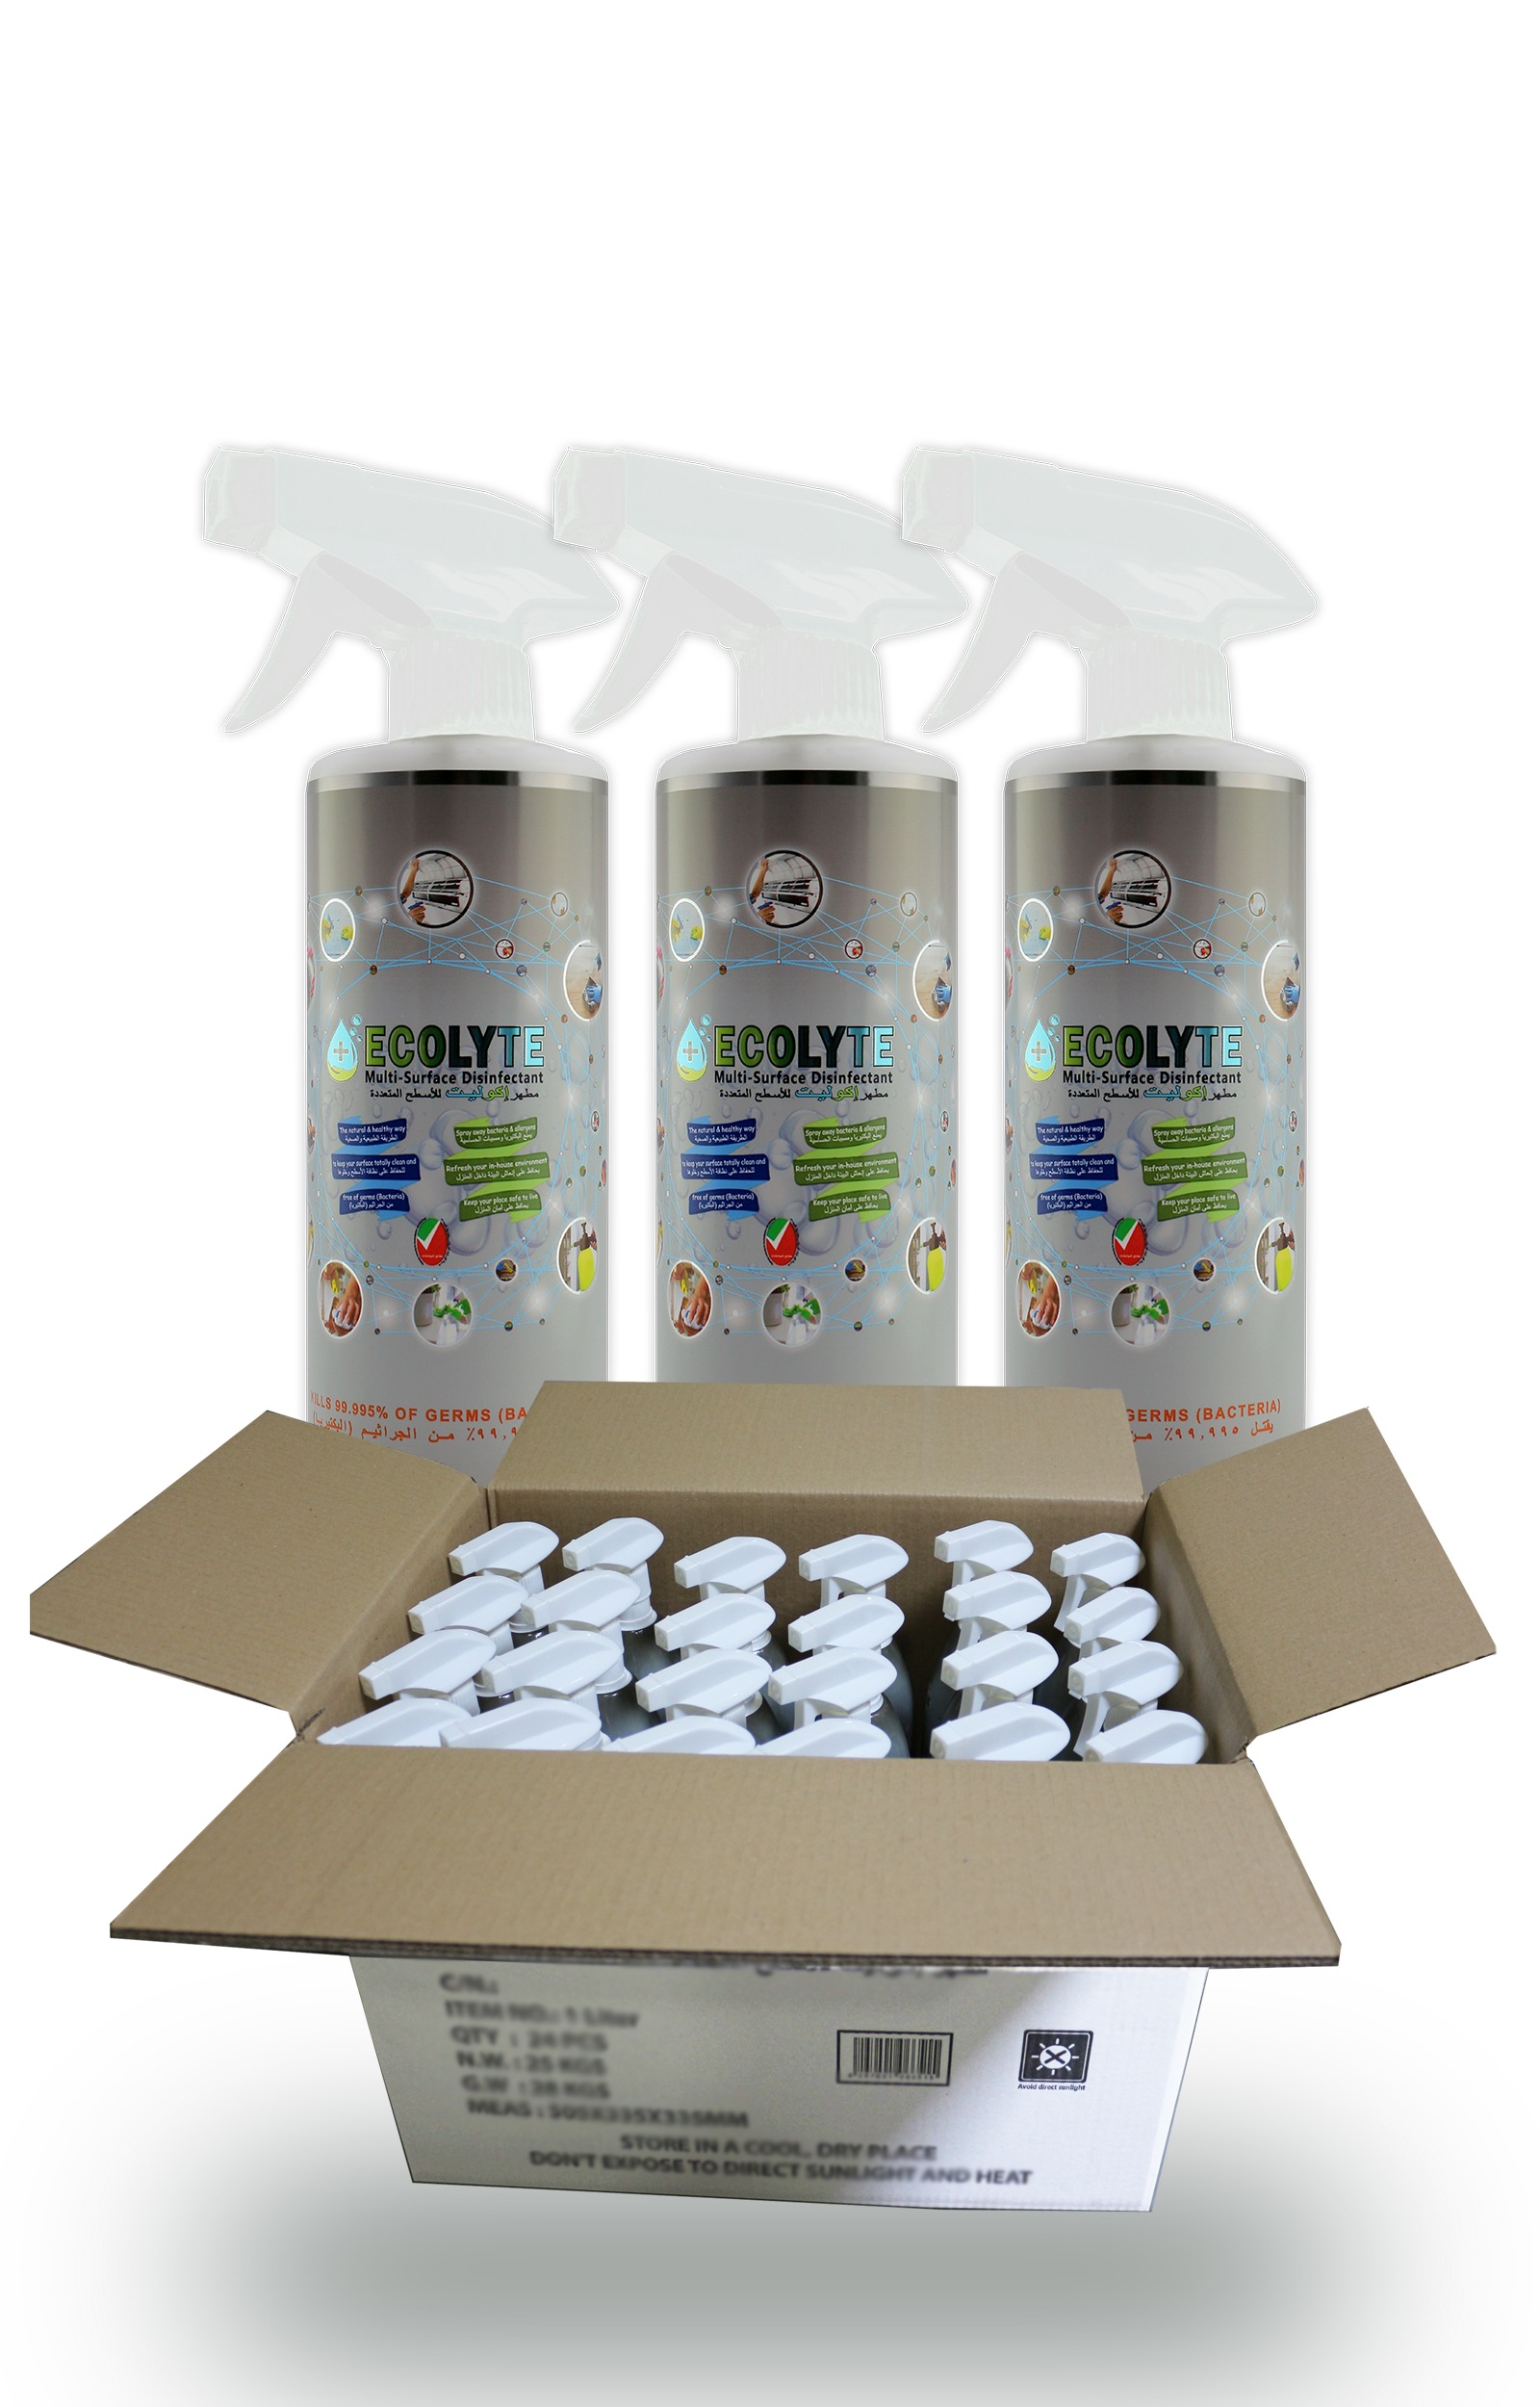 Ecolyte multi-surface disinfectant 100% natural - 500 ml x 24pcs